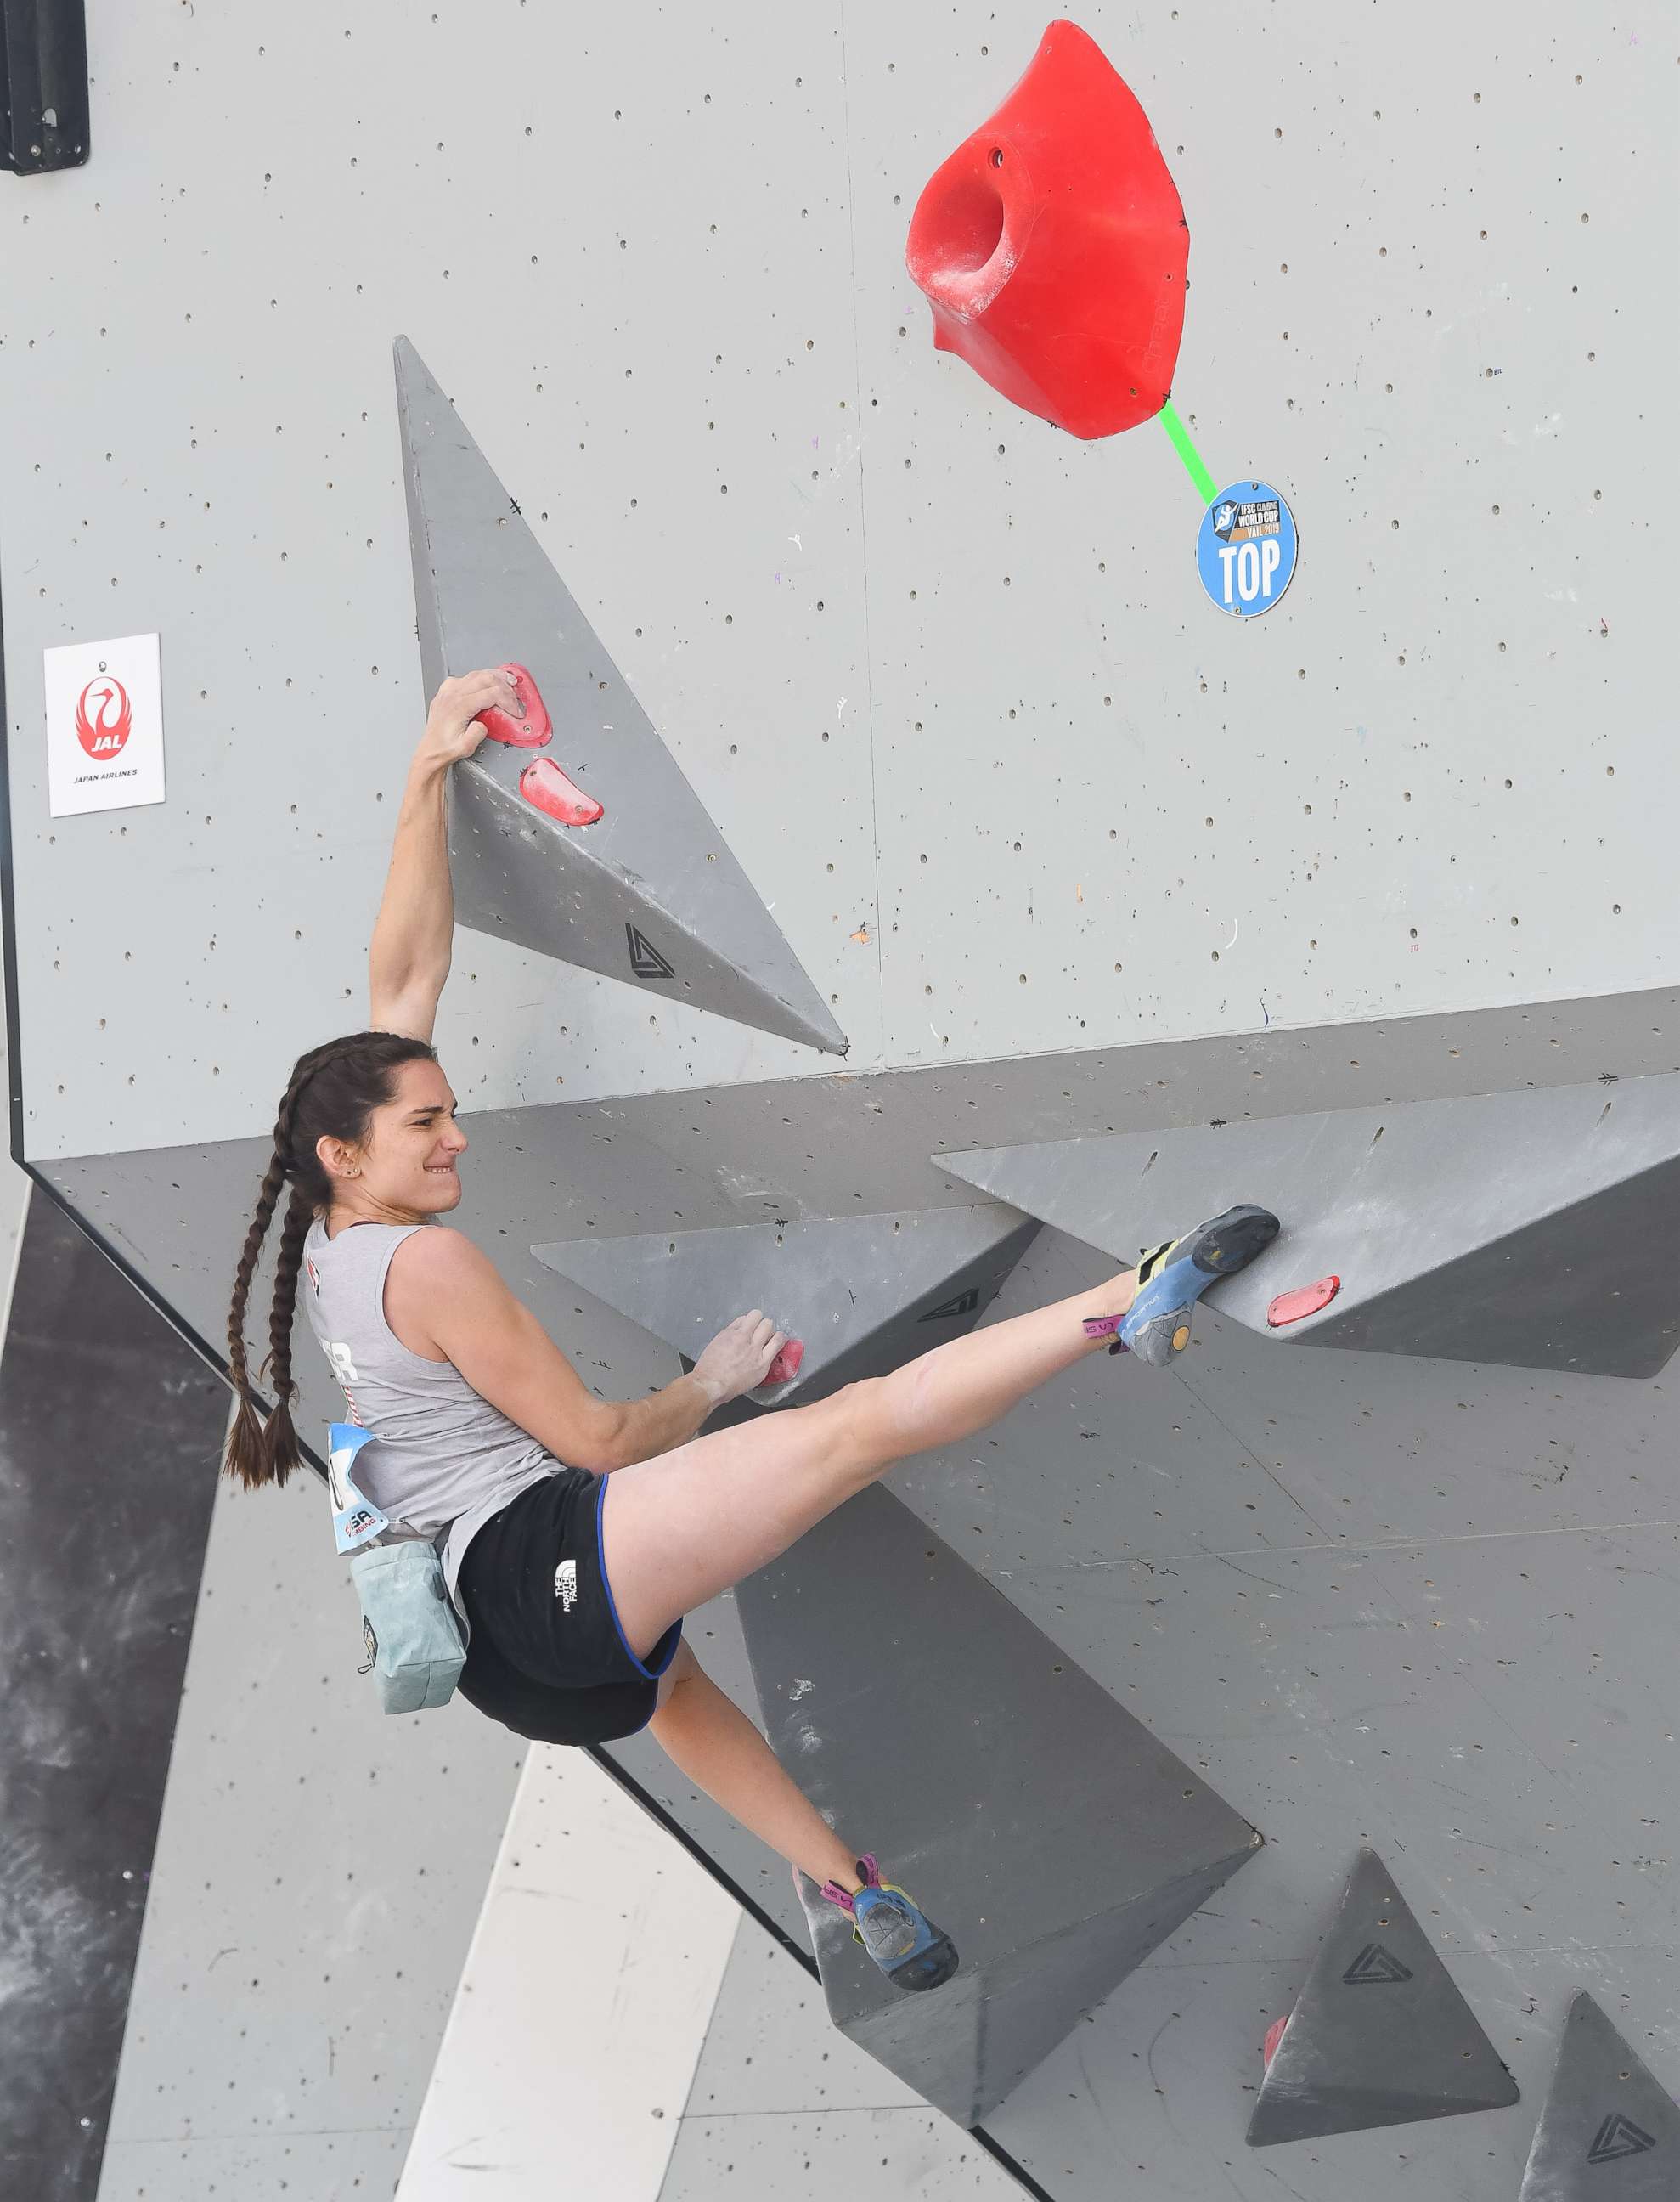 PHOTO: Kyra Condie of Team USA reaches for a foot hold during the IFSC Climbing Vail World Cup on June 8, 2019, in Vail, Colo.